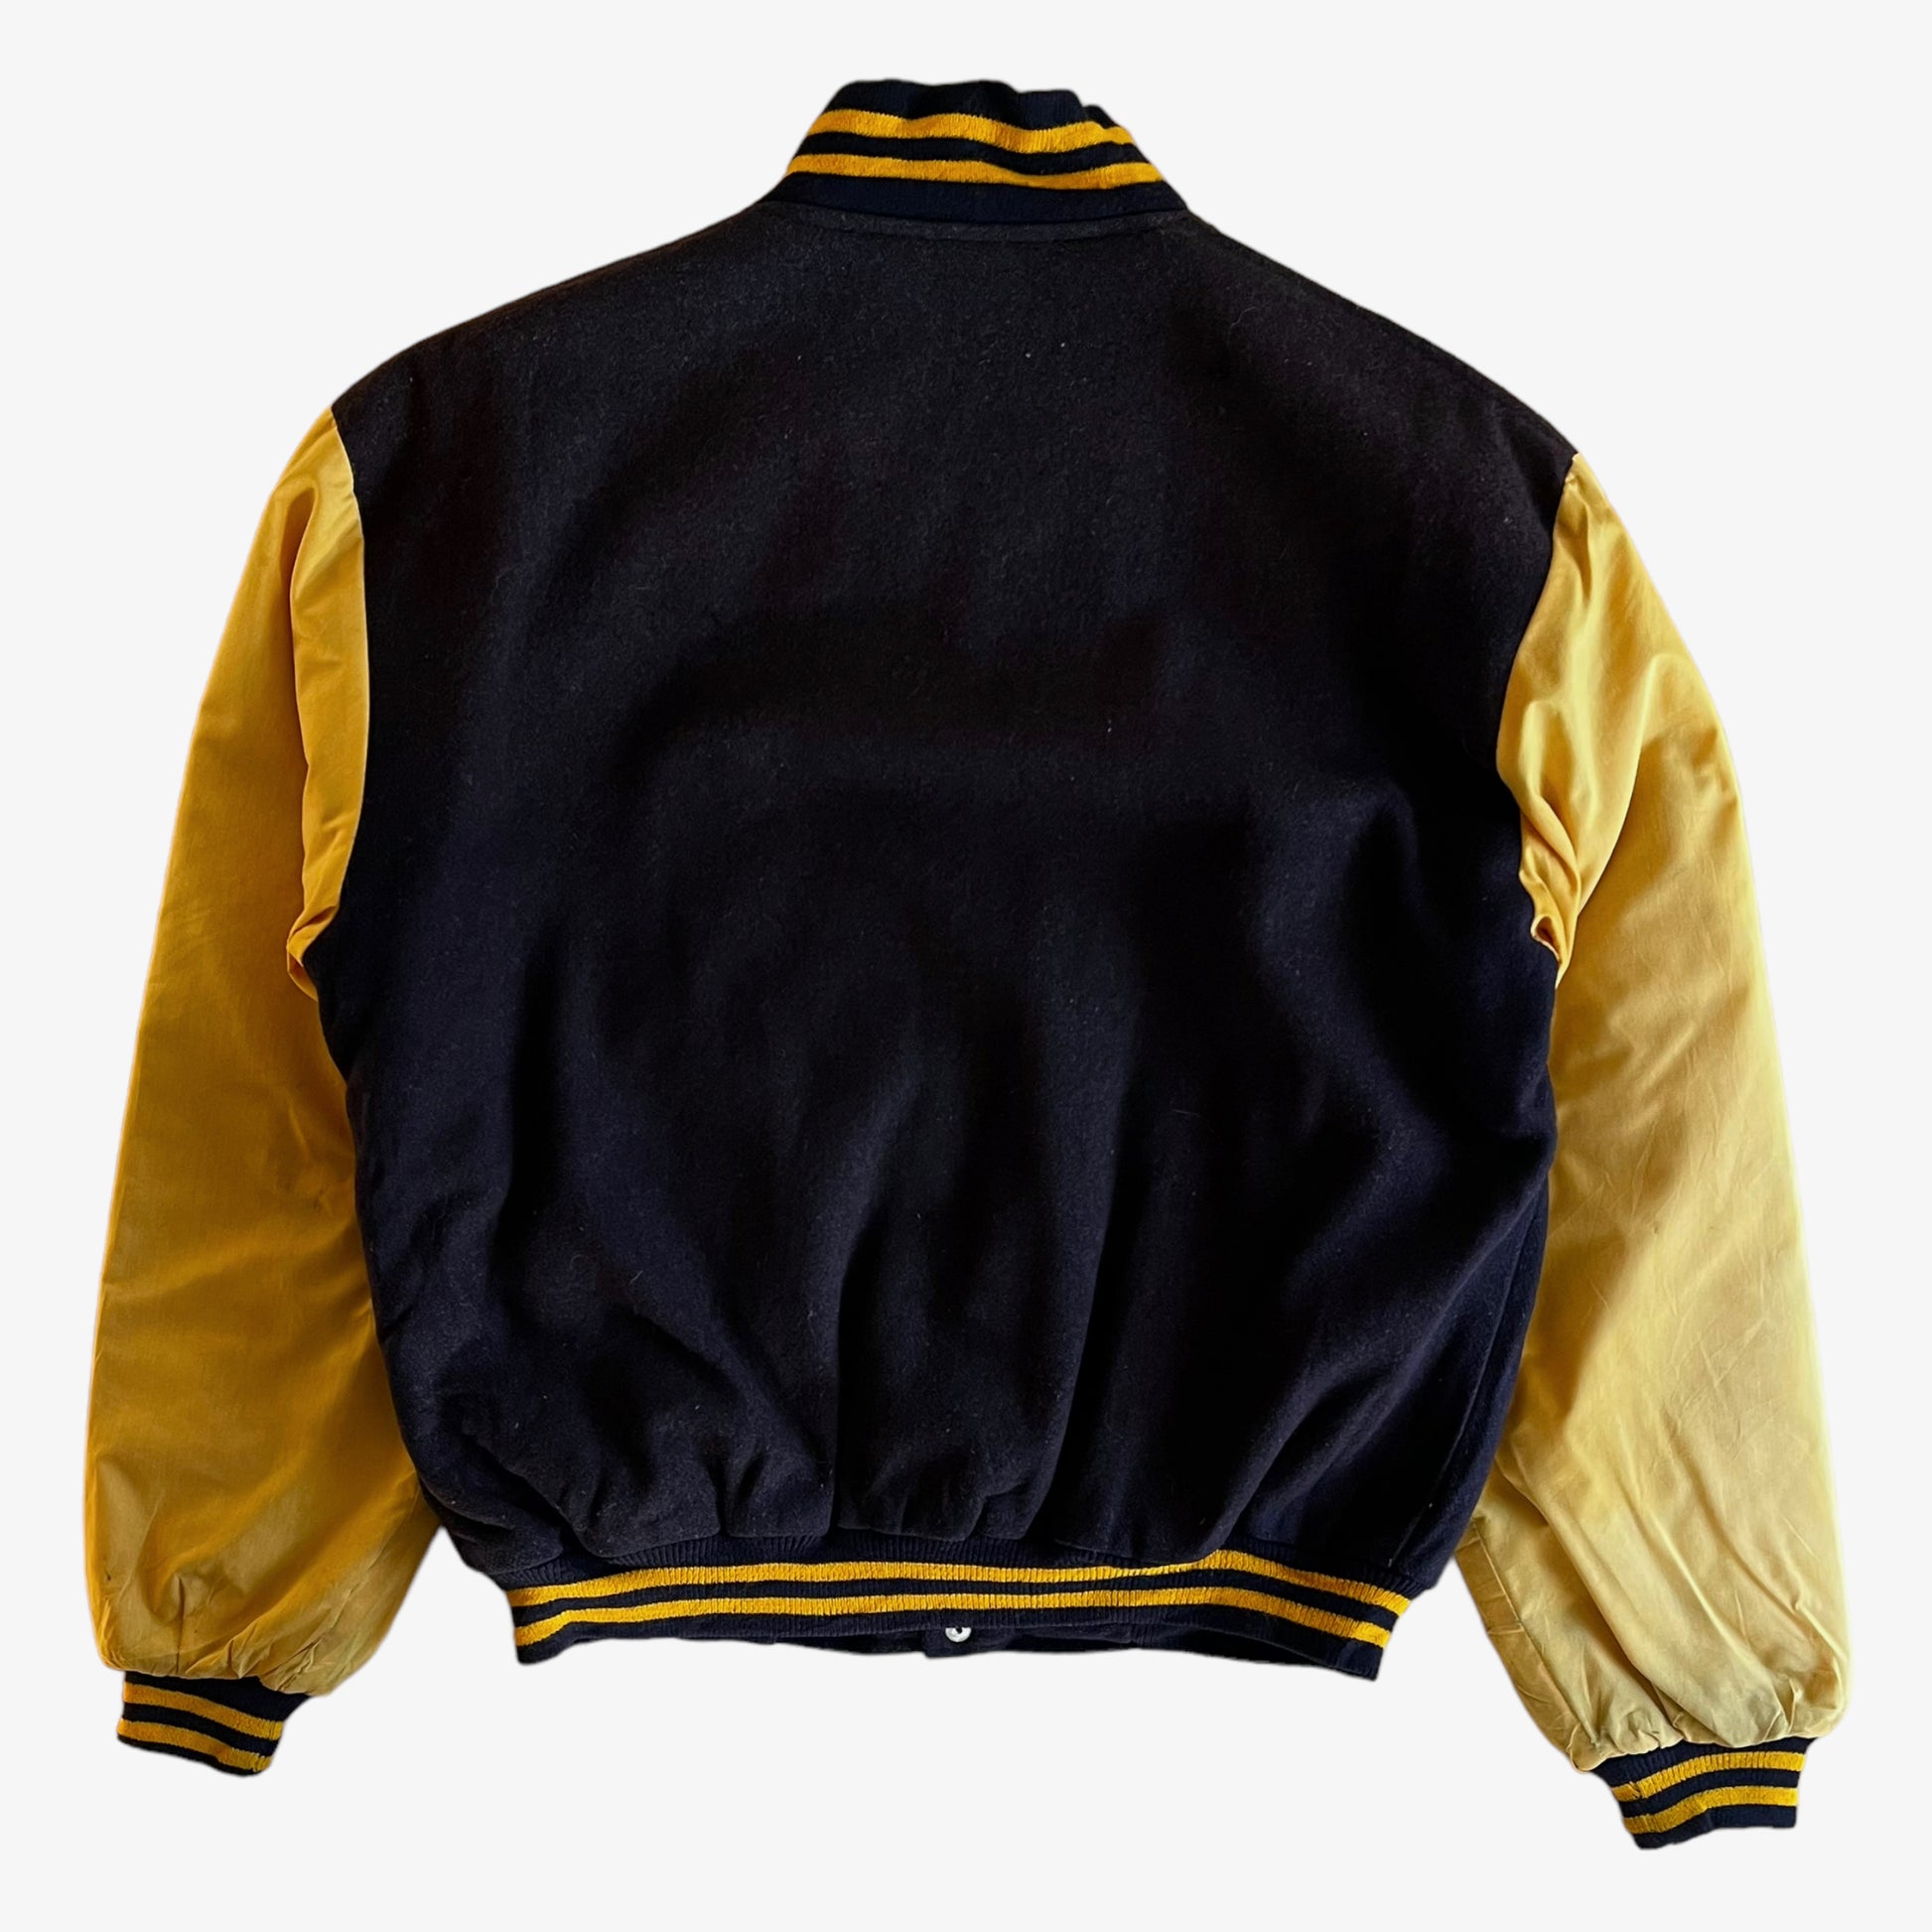 Vintage 90s Toblerone Varsity Jacket With Sleeve Spell Out Back - Casspios Dream